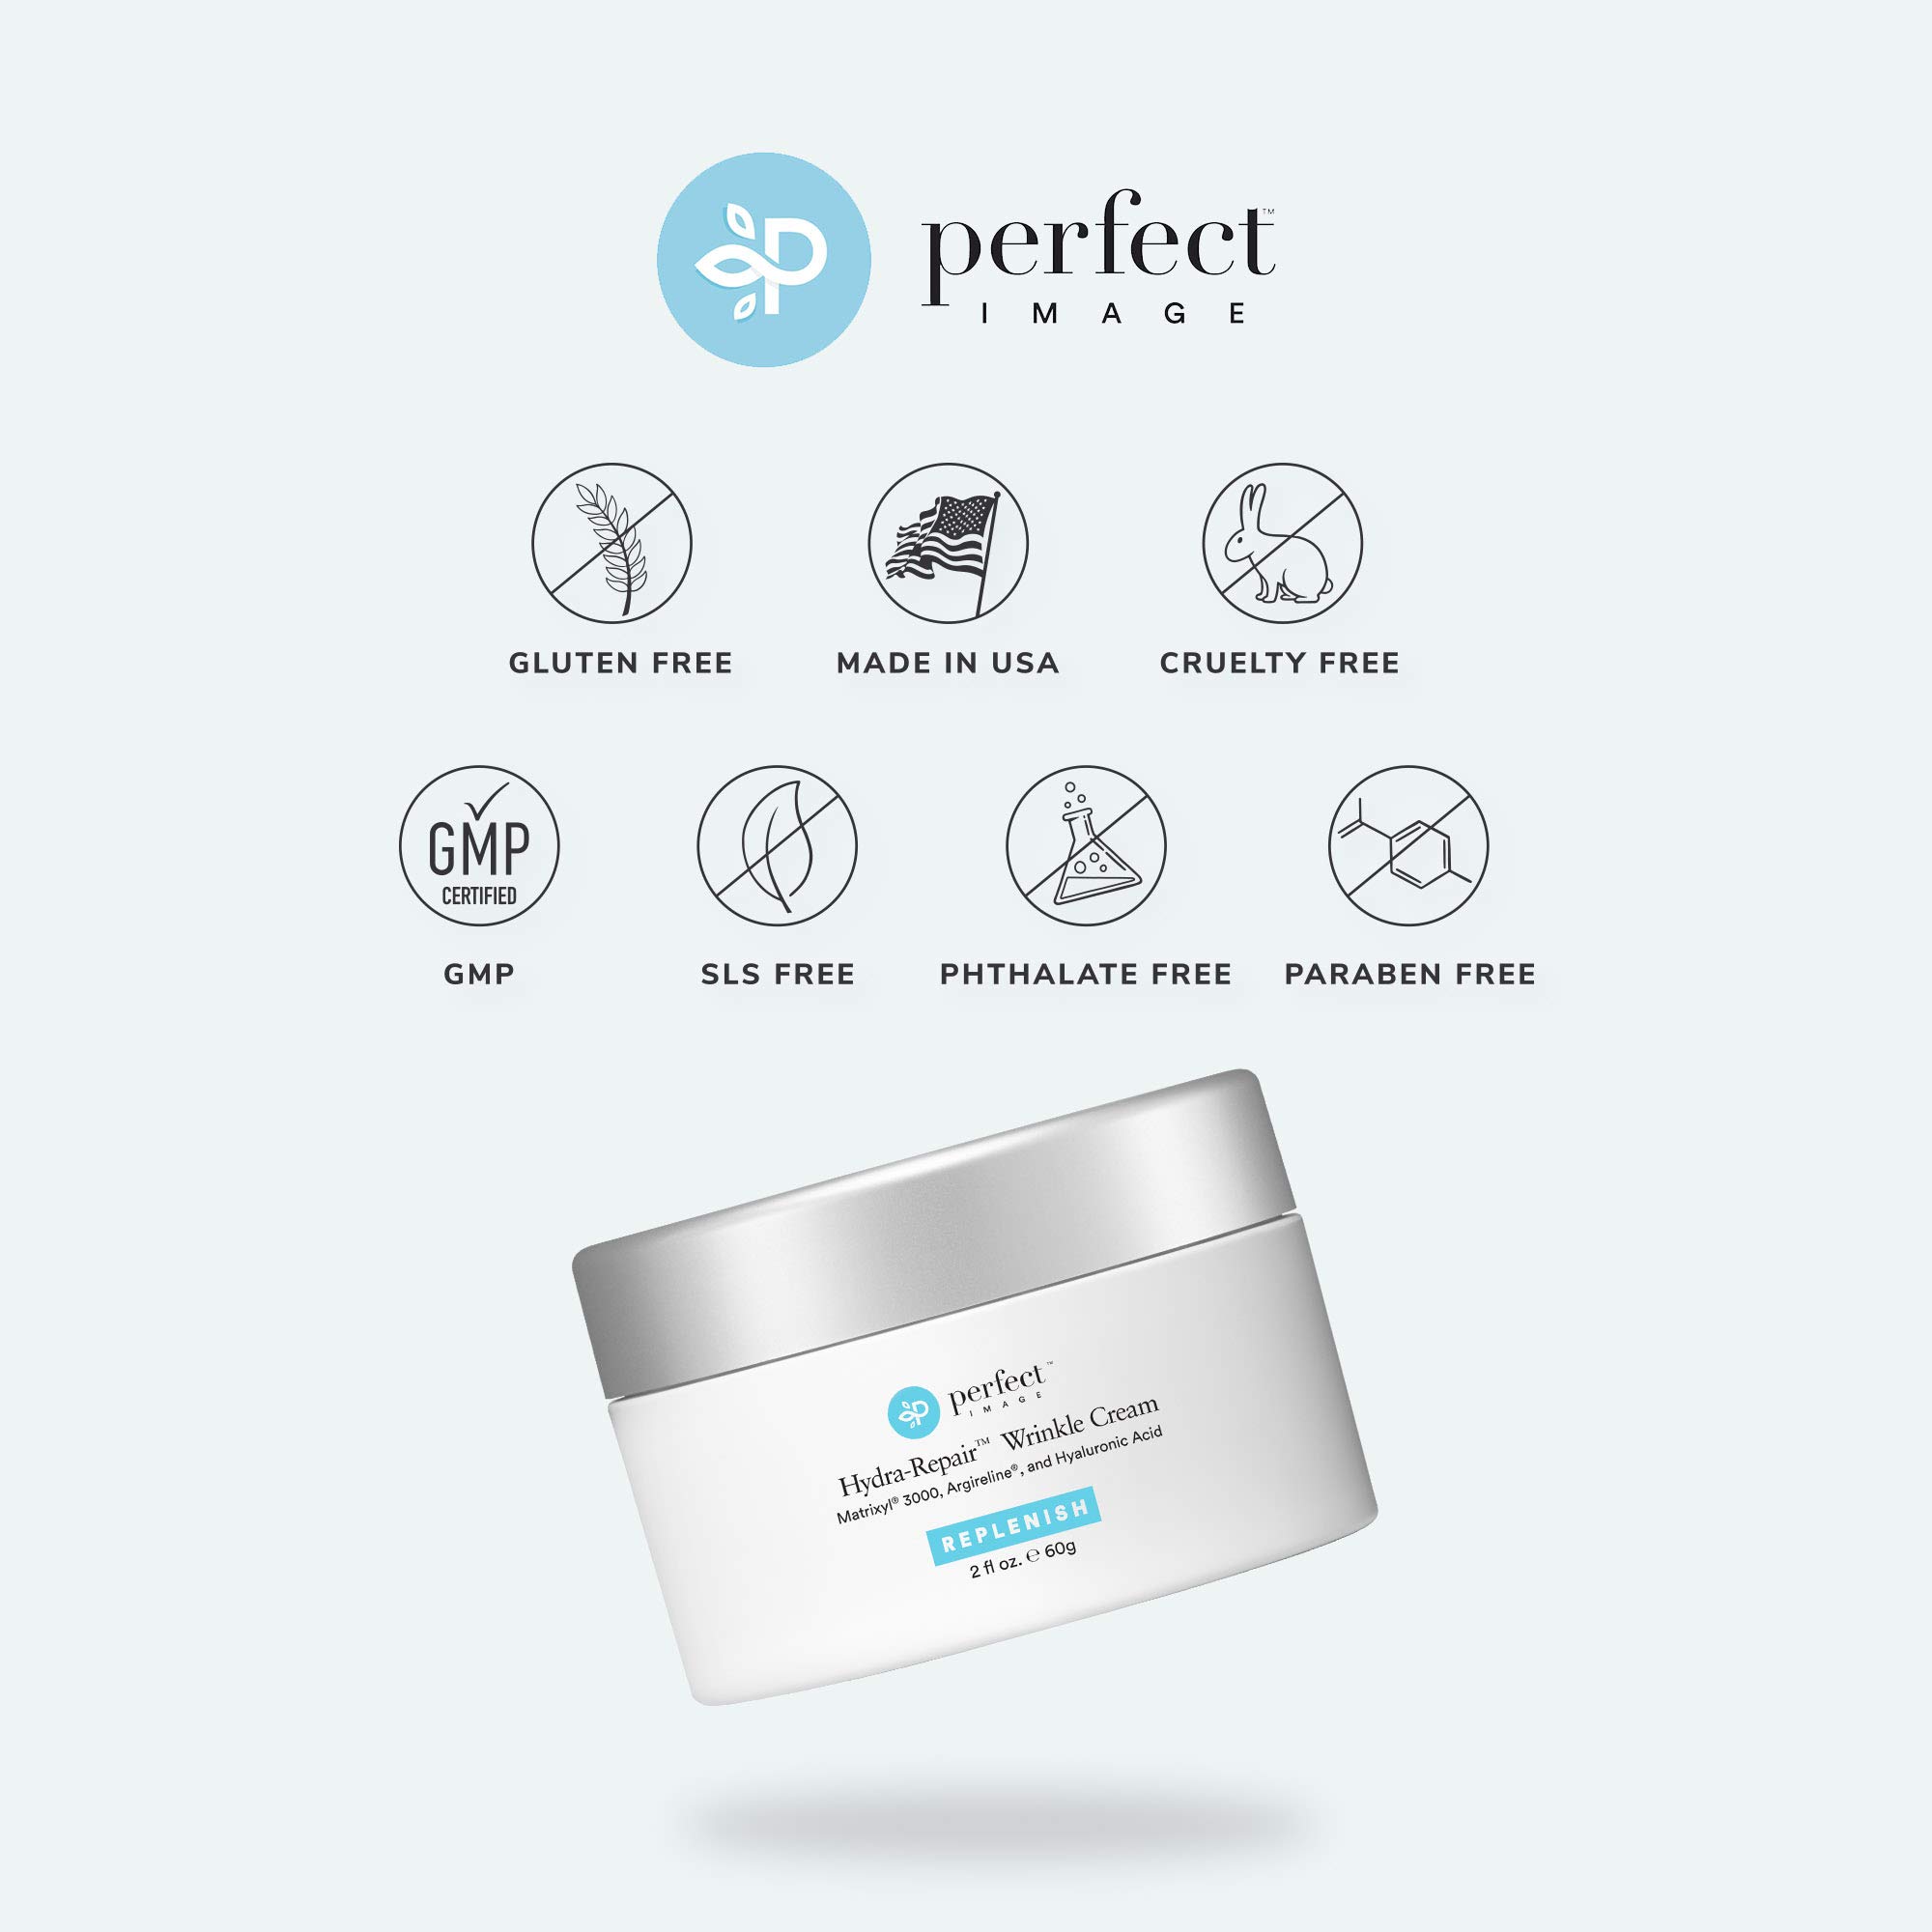 Perfect Image Hydra-Repair Wrinkle Cream for Face (Post Peel), Anti Wrinkle Cream with Matrixyl 3000, Argireline, Hyaluronic Acid, and Natural Botanical Extracts